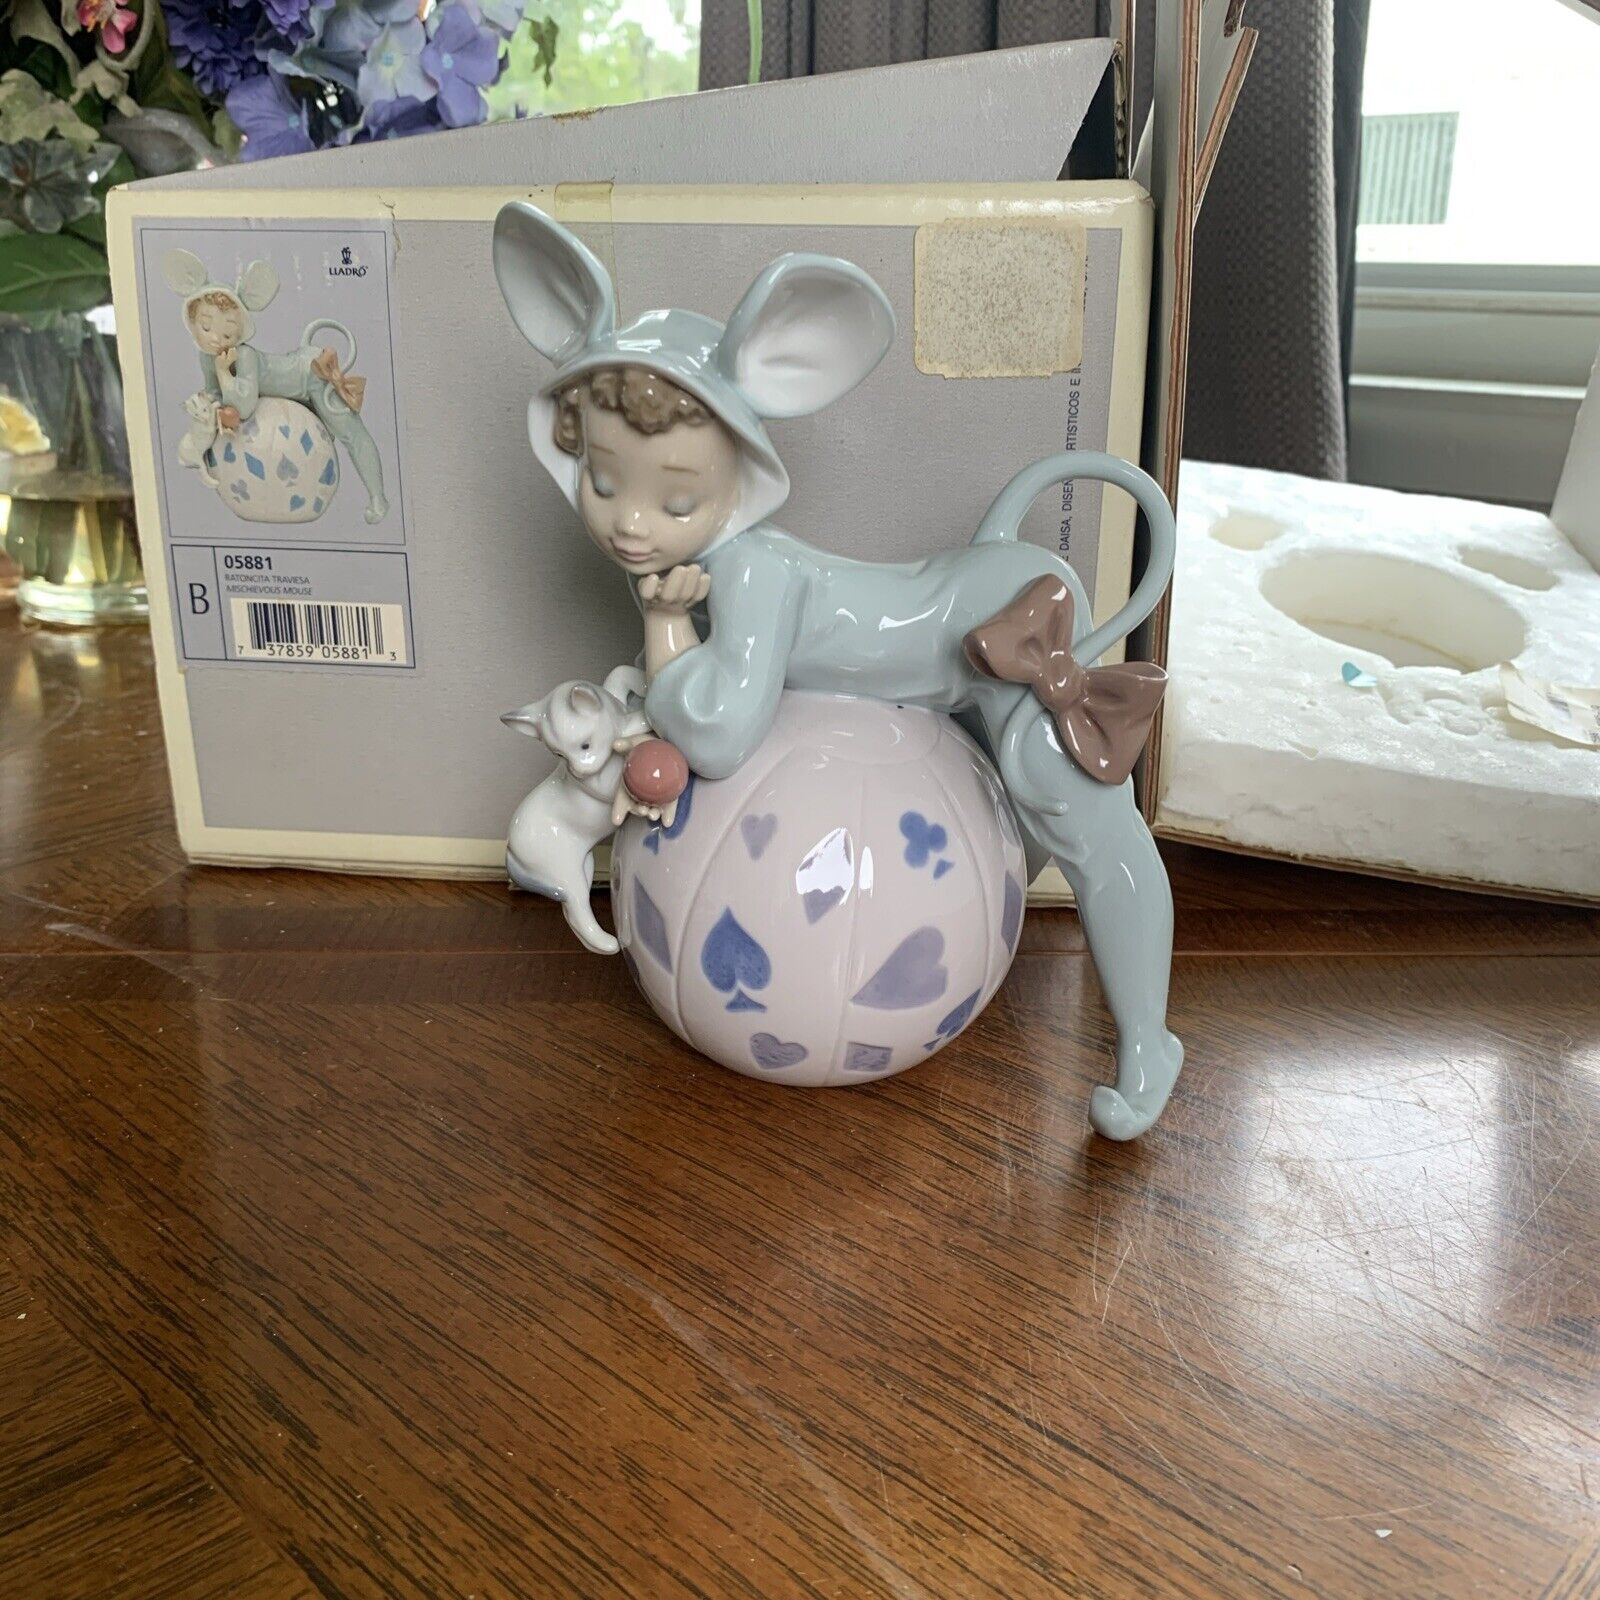 RARE MIB LLADRO 5881 MISCHIEVOUS MOUSE CAT BALL FIGURINE MADE IN SPAIN - RETIRED